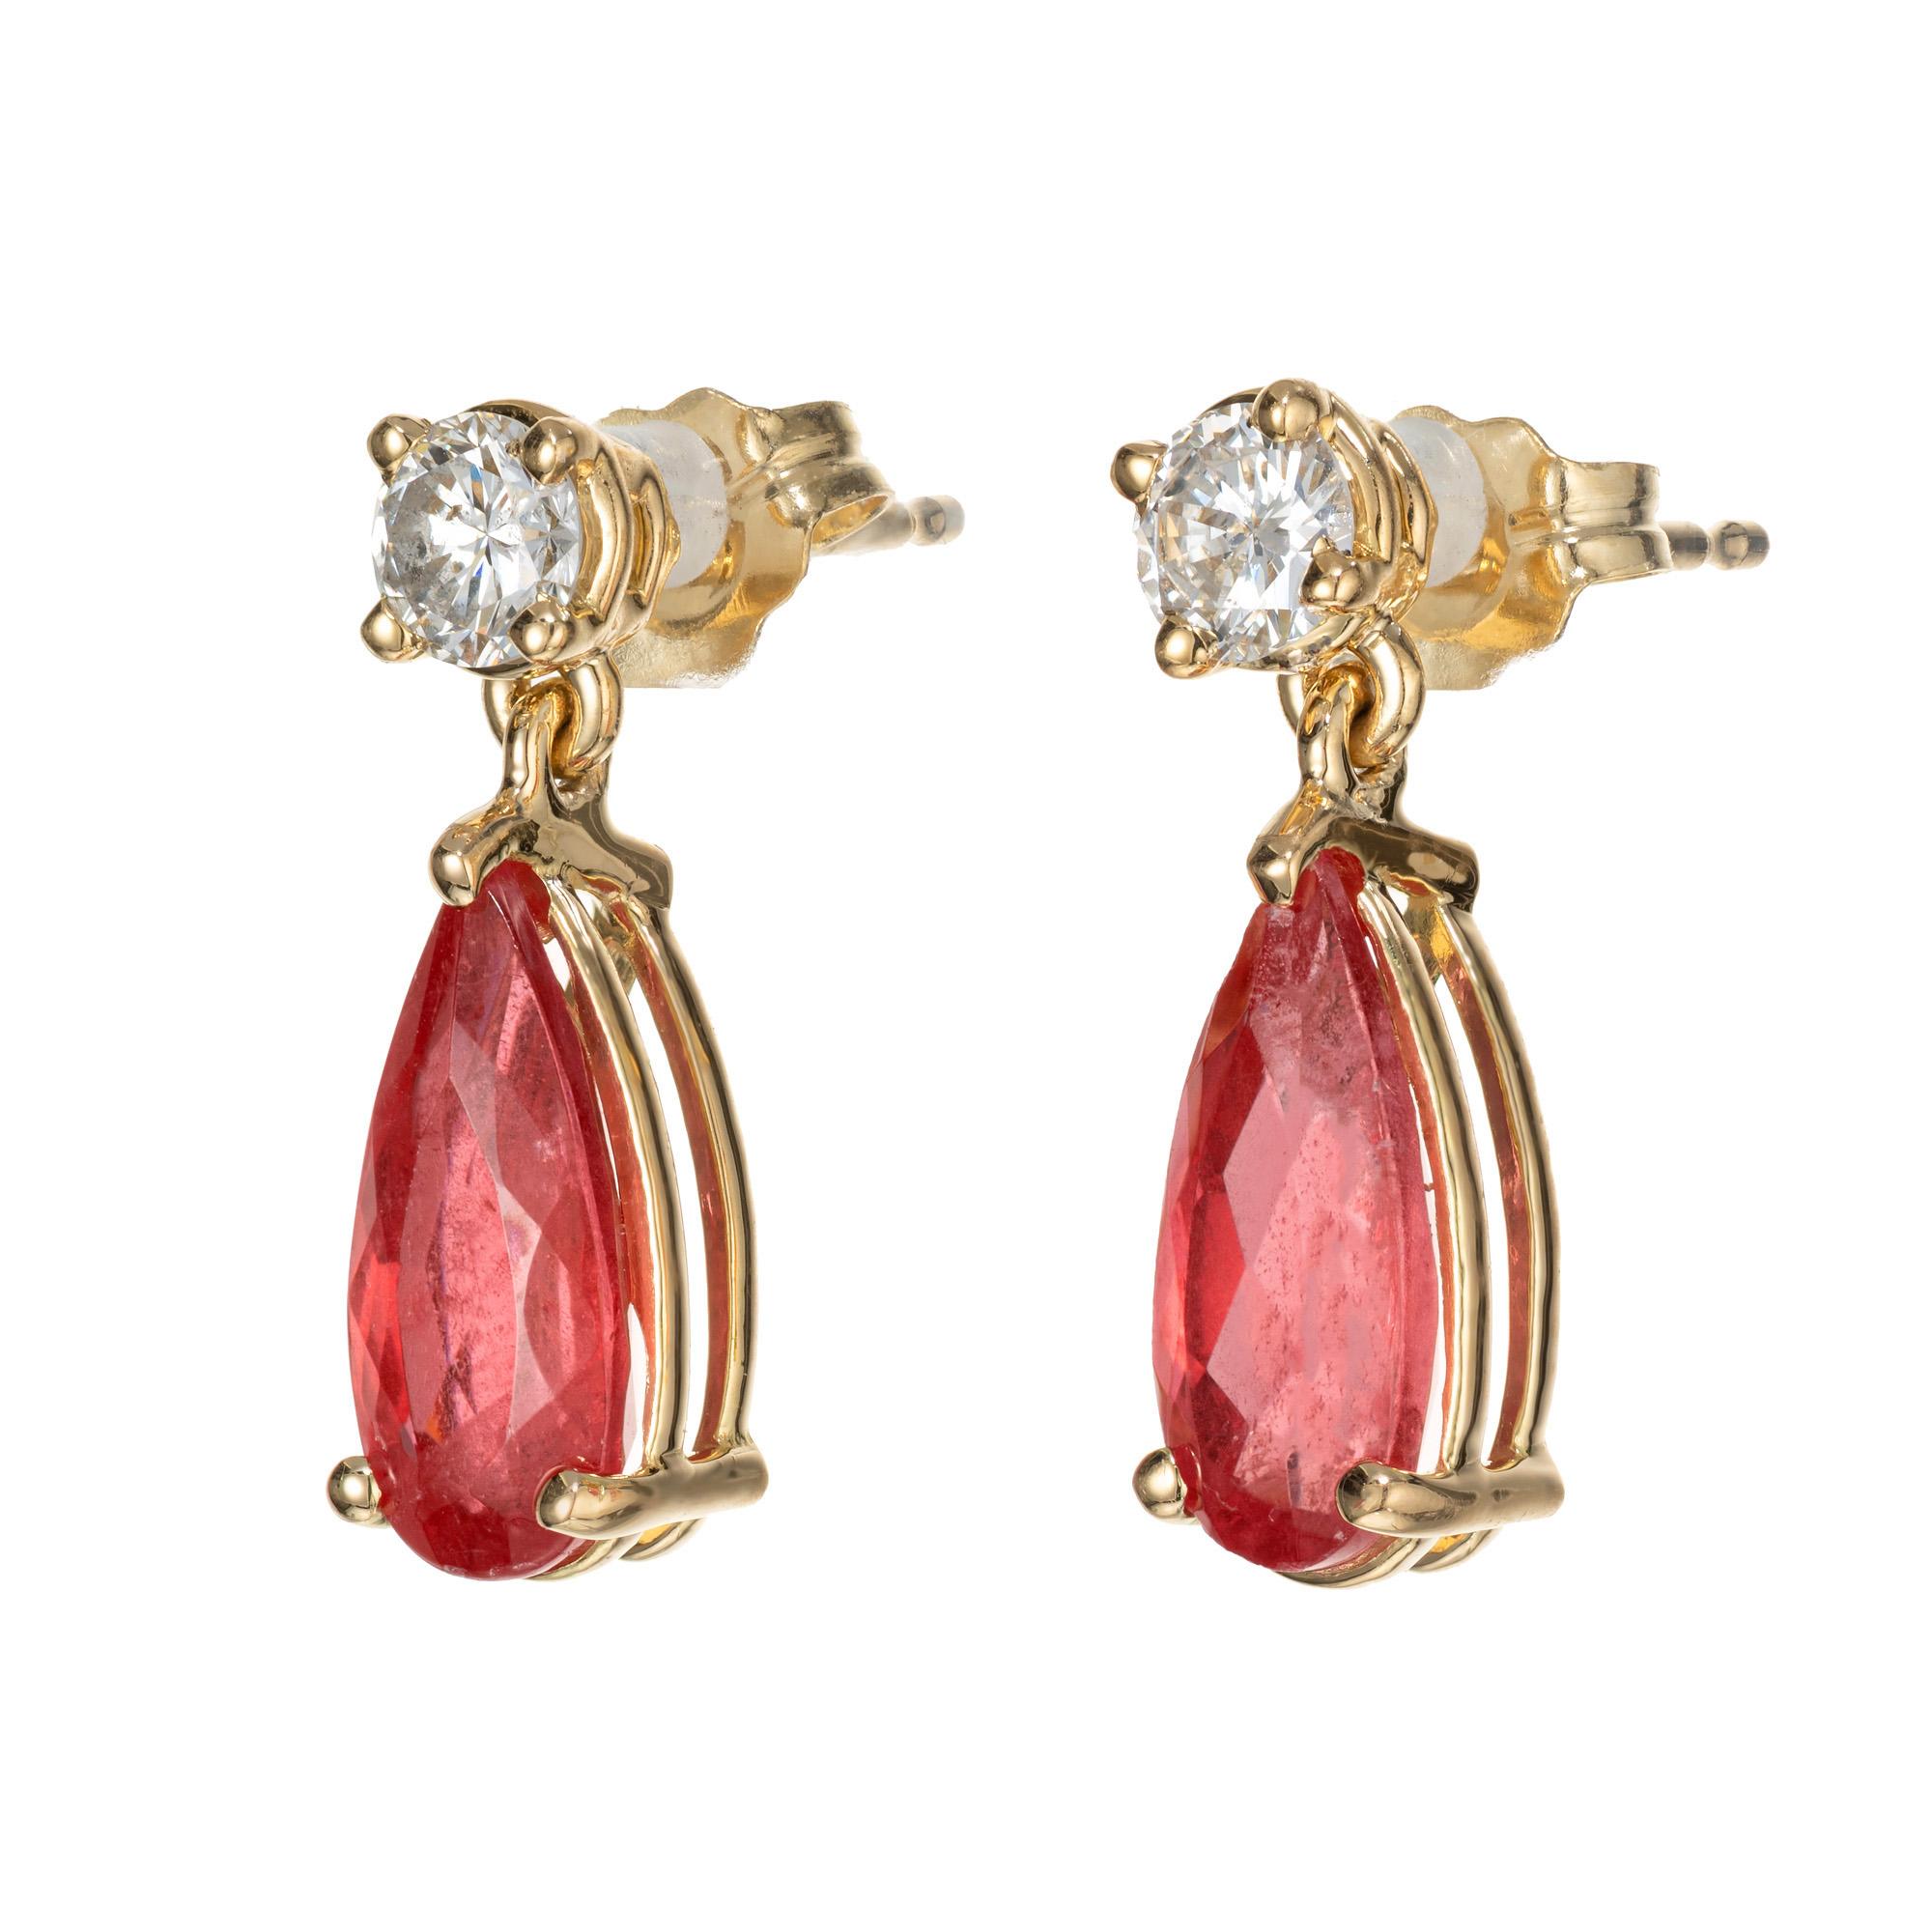 Rare orange red rodonite diamond dangle earrings. Desined and crafted in the Peter Suchy workshop

2 pear shape orangy red rhodonite, approx. 2.81cts GIA Certificate # 2223381437
2 round diamons, H-I SI-I approx. .36cts 
18k yellow gold 
Stamped: